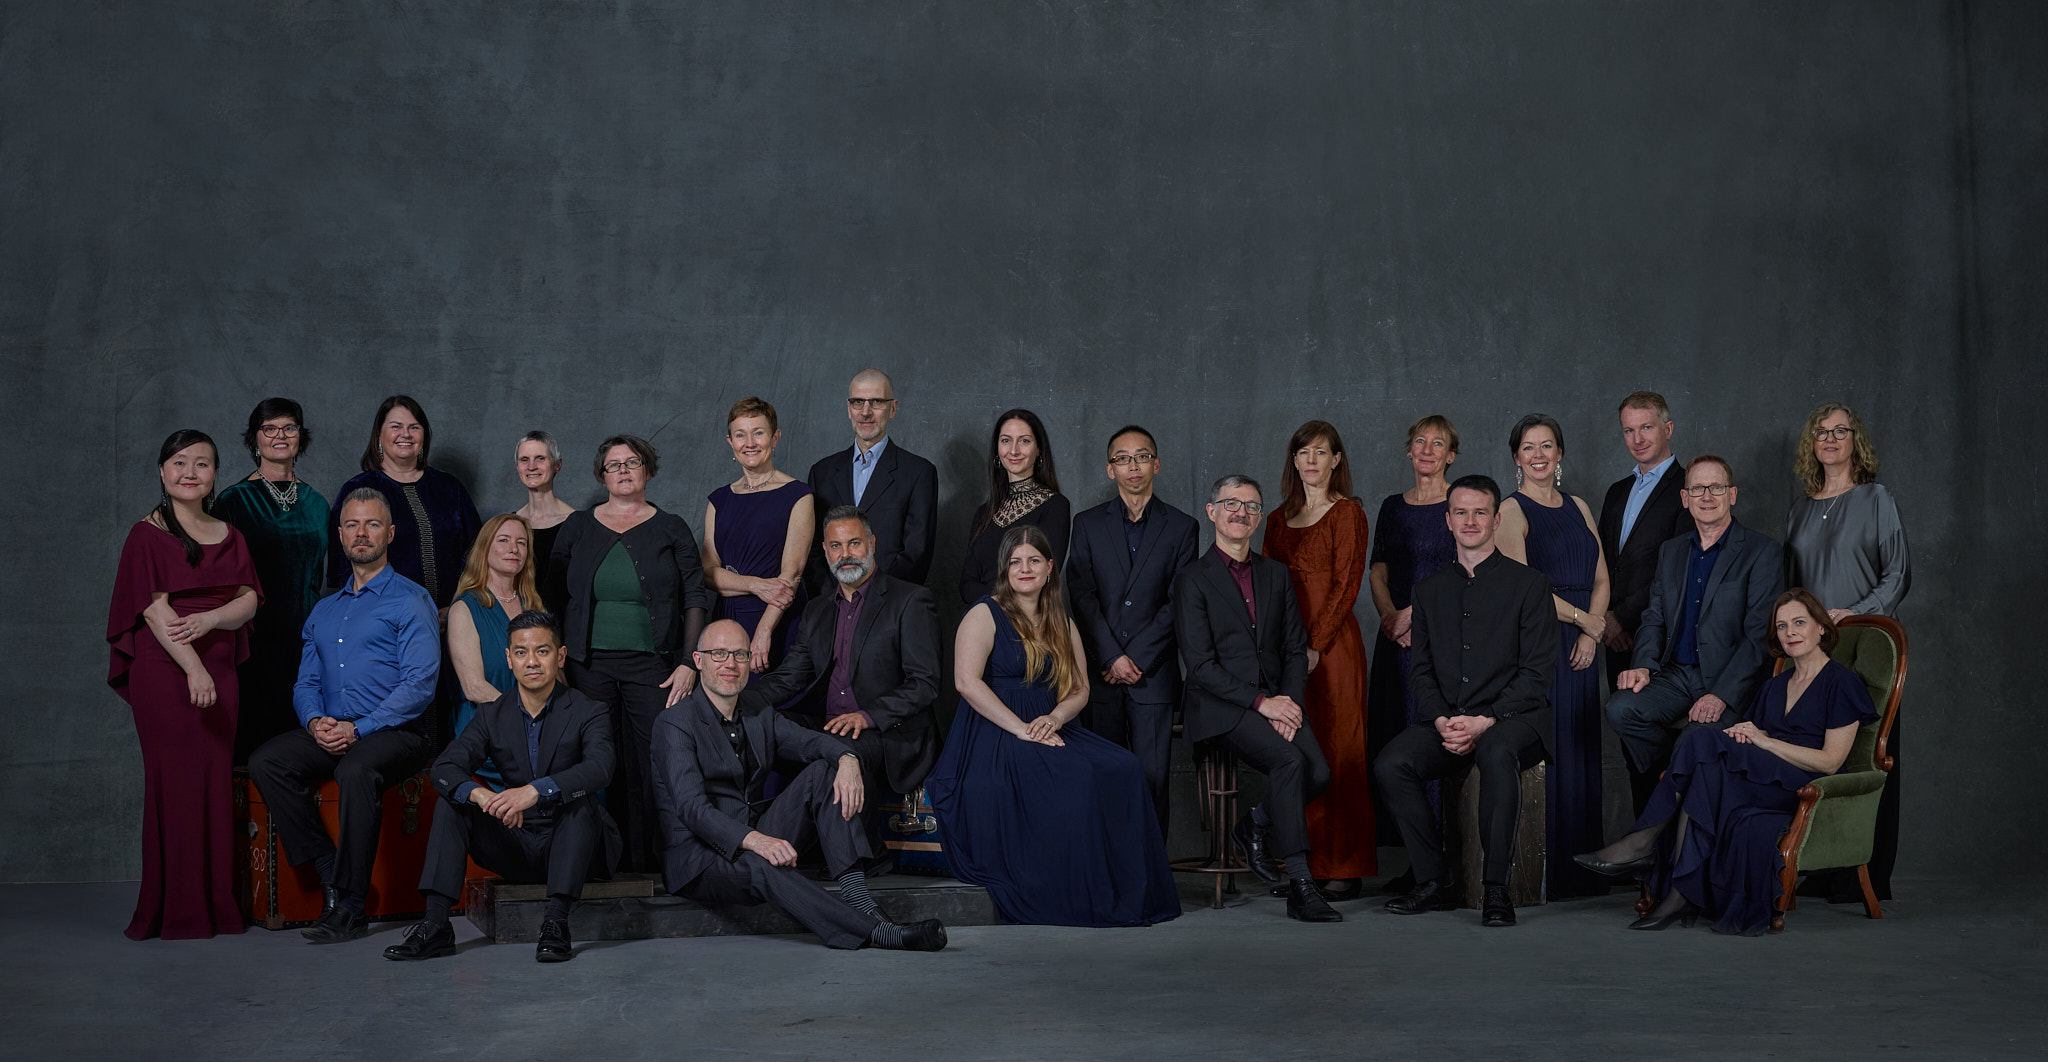 Sydney Chamber Choir, from the depths of Shade to the joy of Light